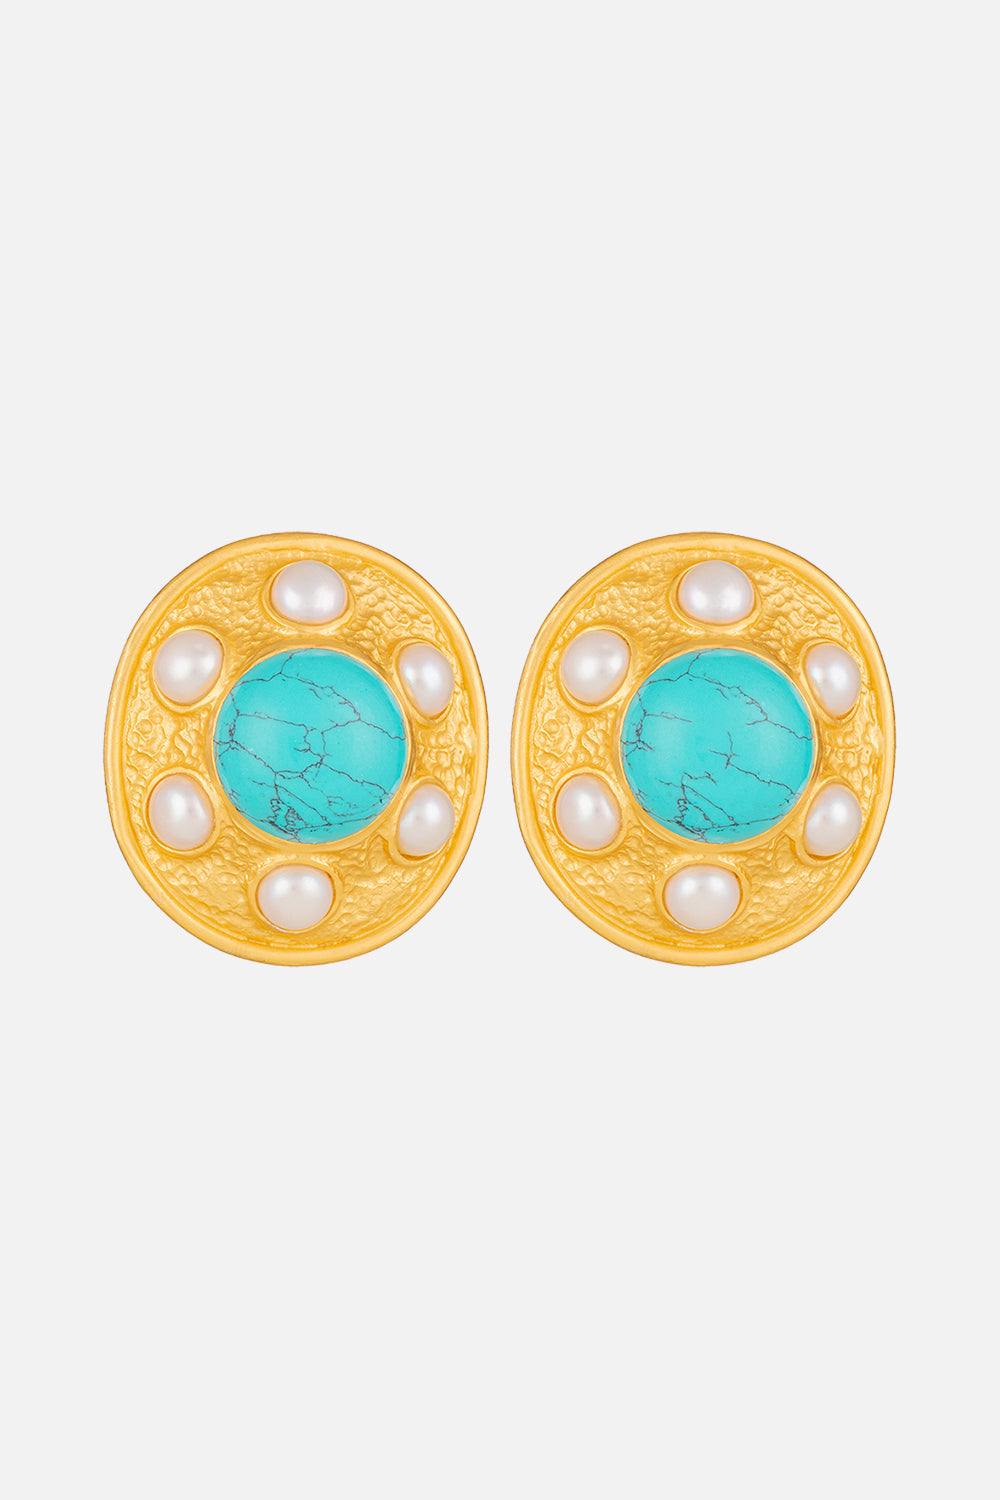 CAMILLA turquoise and pear earrings